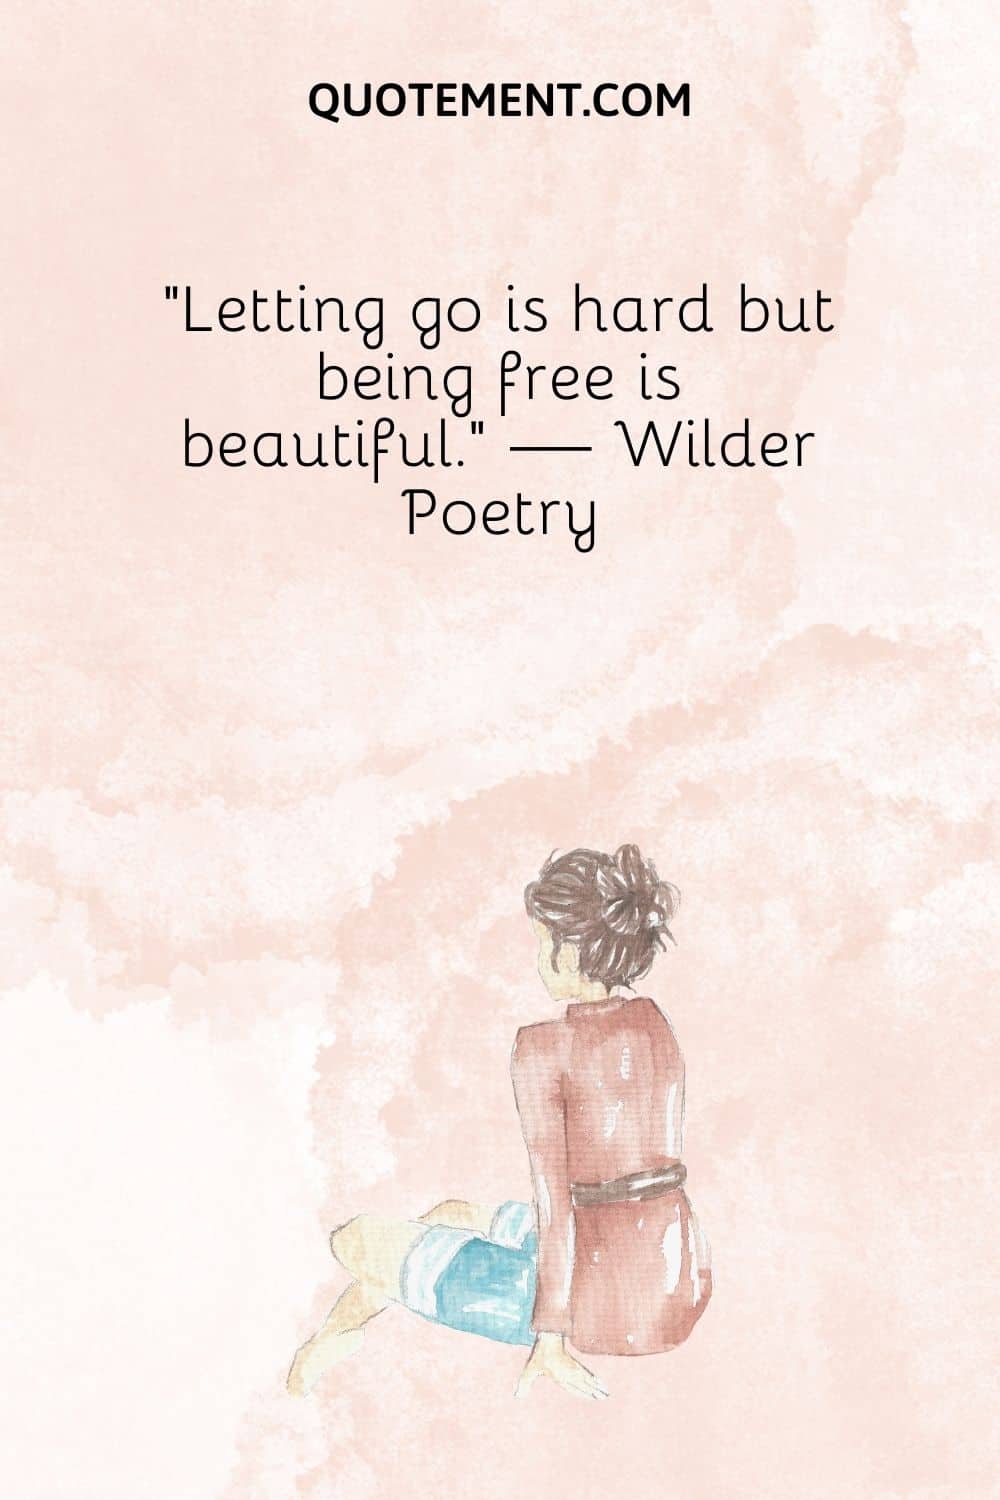 Letting go is hard but being free is beautiful.